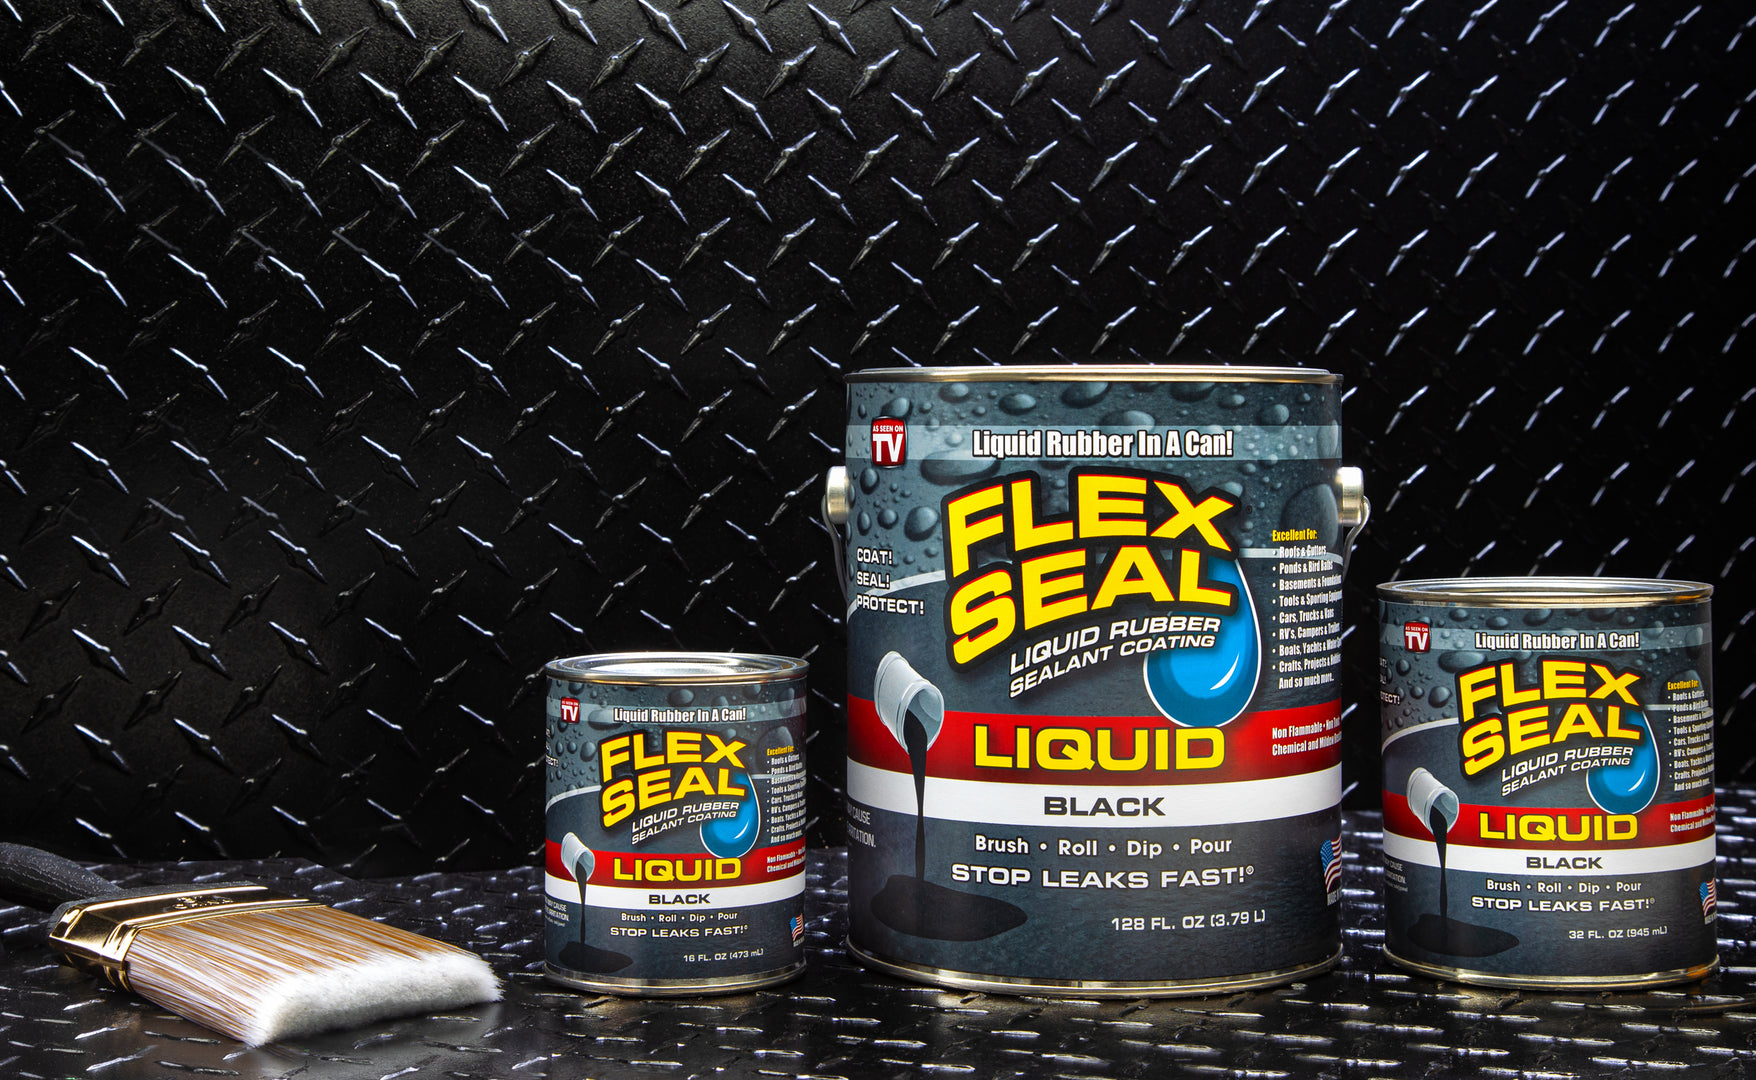 The Flex Seal Family of Products: Because it Works